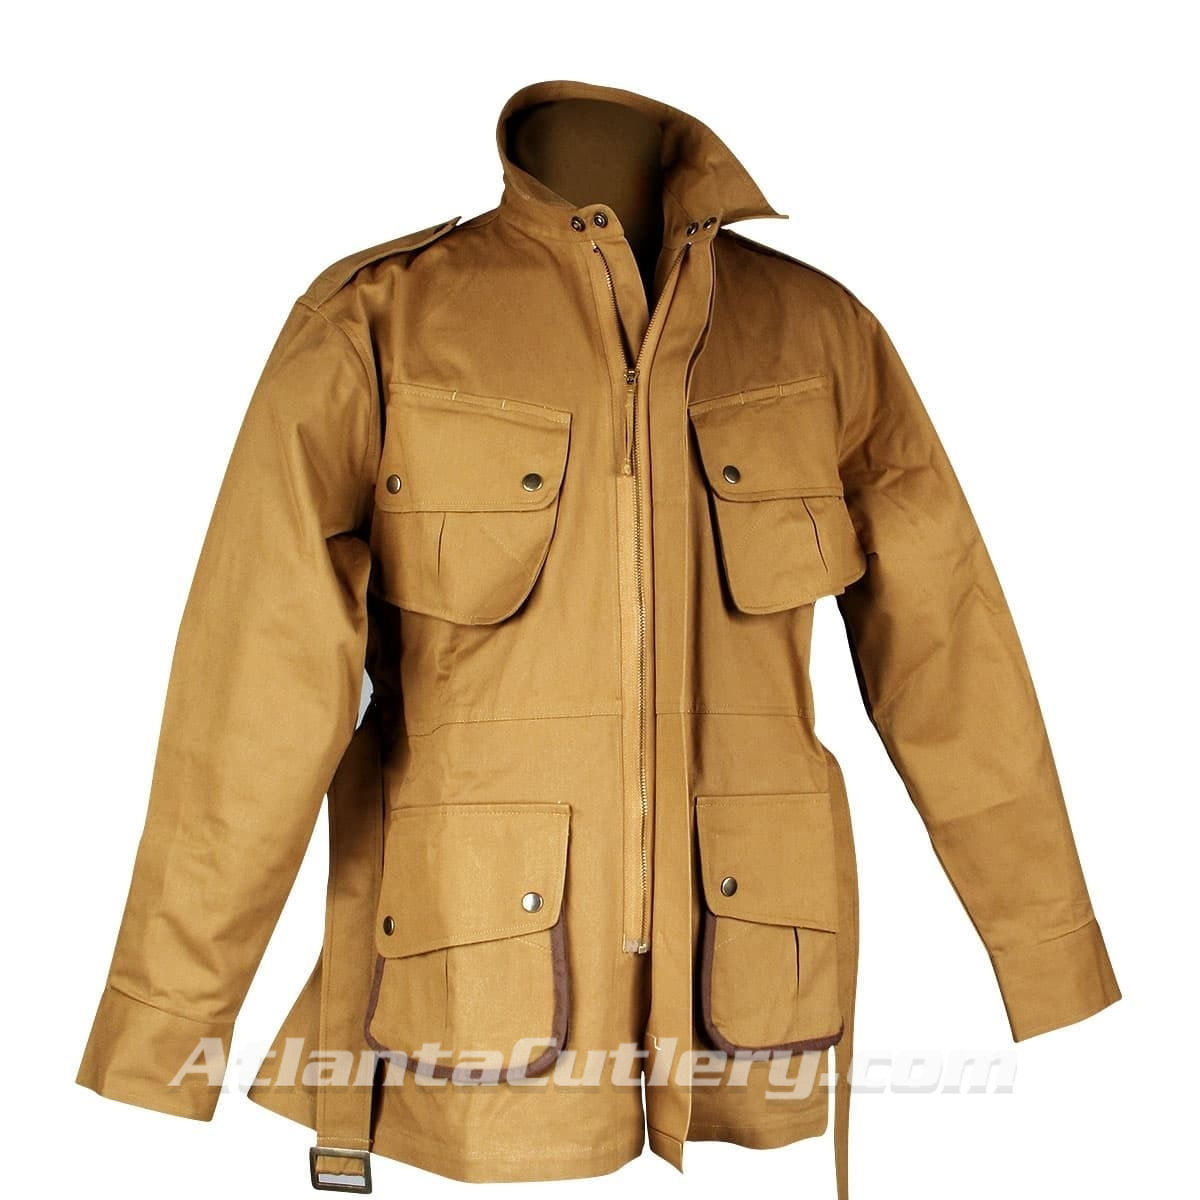 US WWII Paratrooper Zipper Front Reproduction Jacket